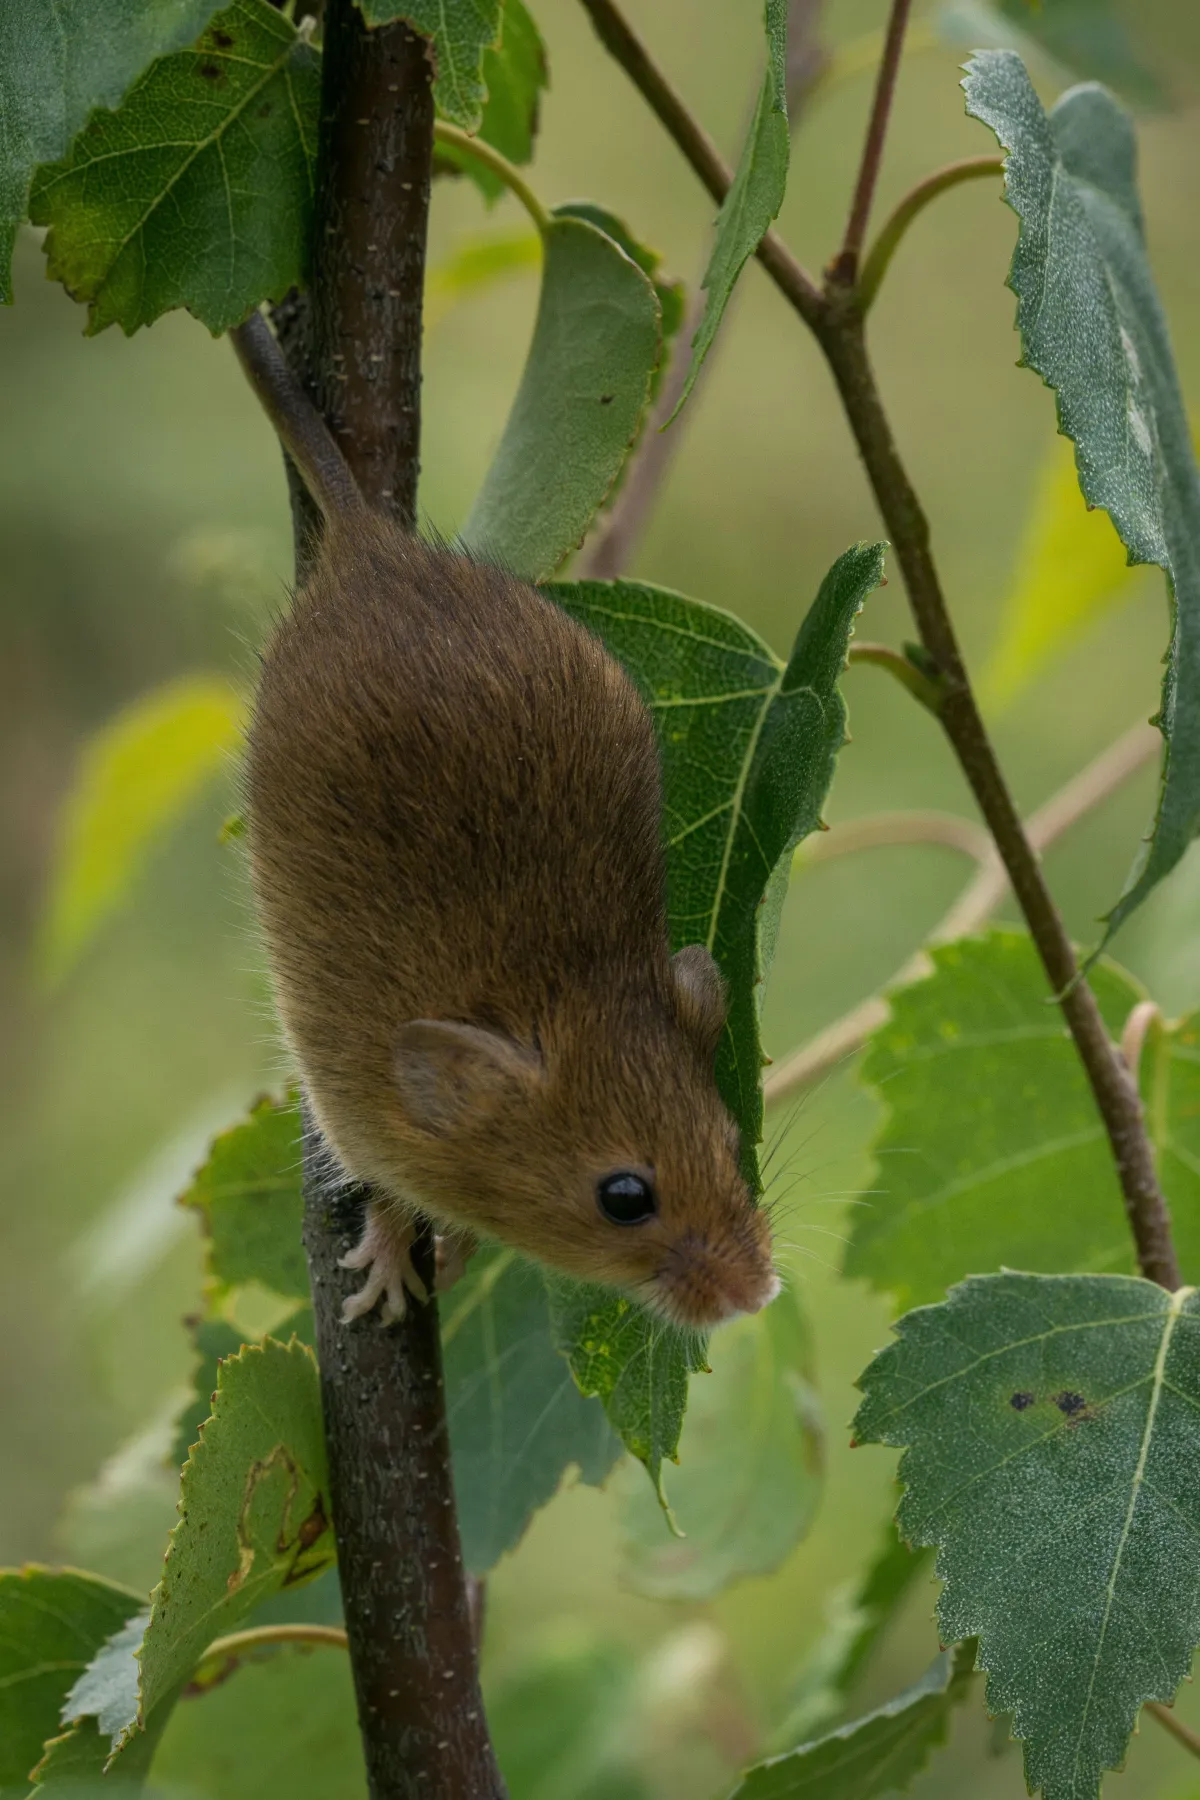 a close up photograph of a rodent climbing down a tree branch